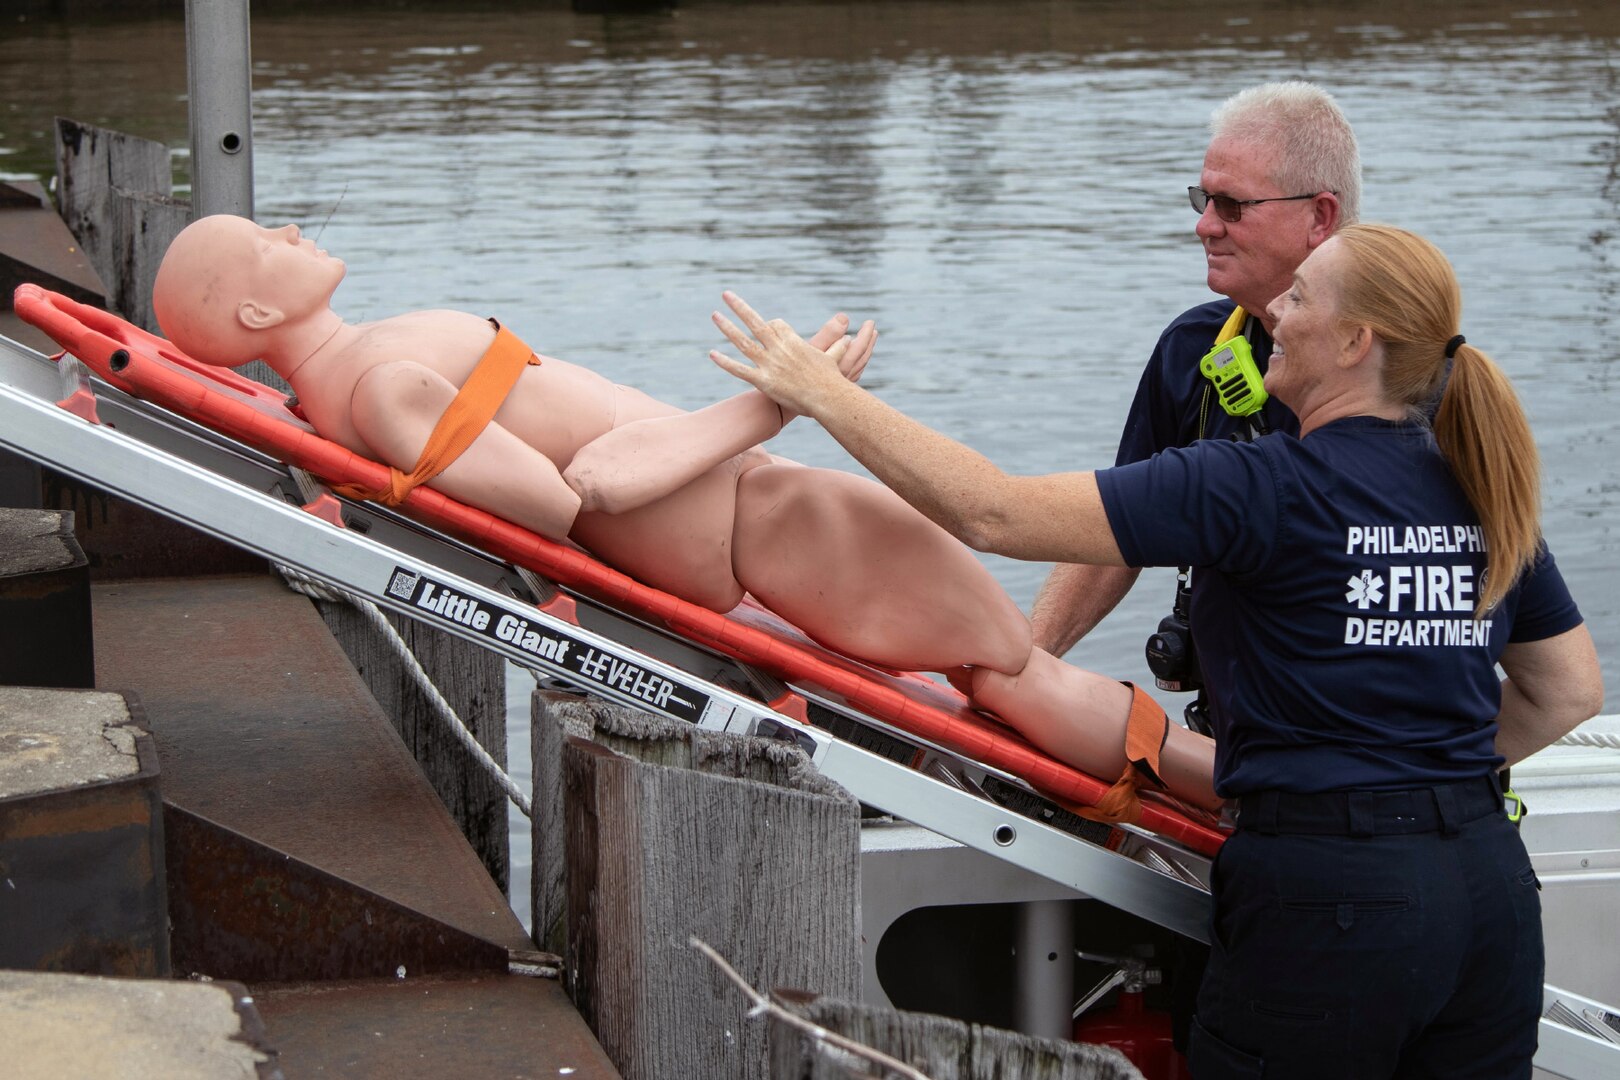 Delivering a notional victim to mass casualty decontamination personnel